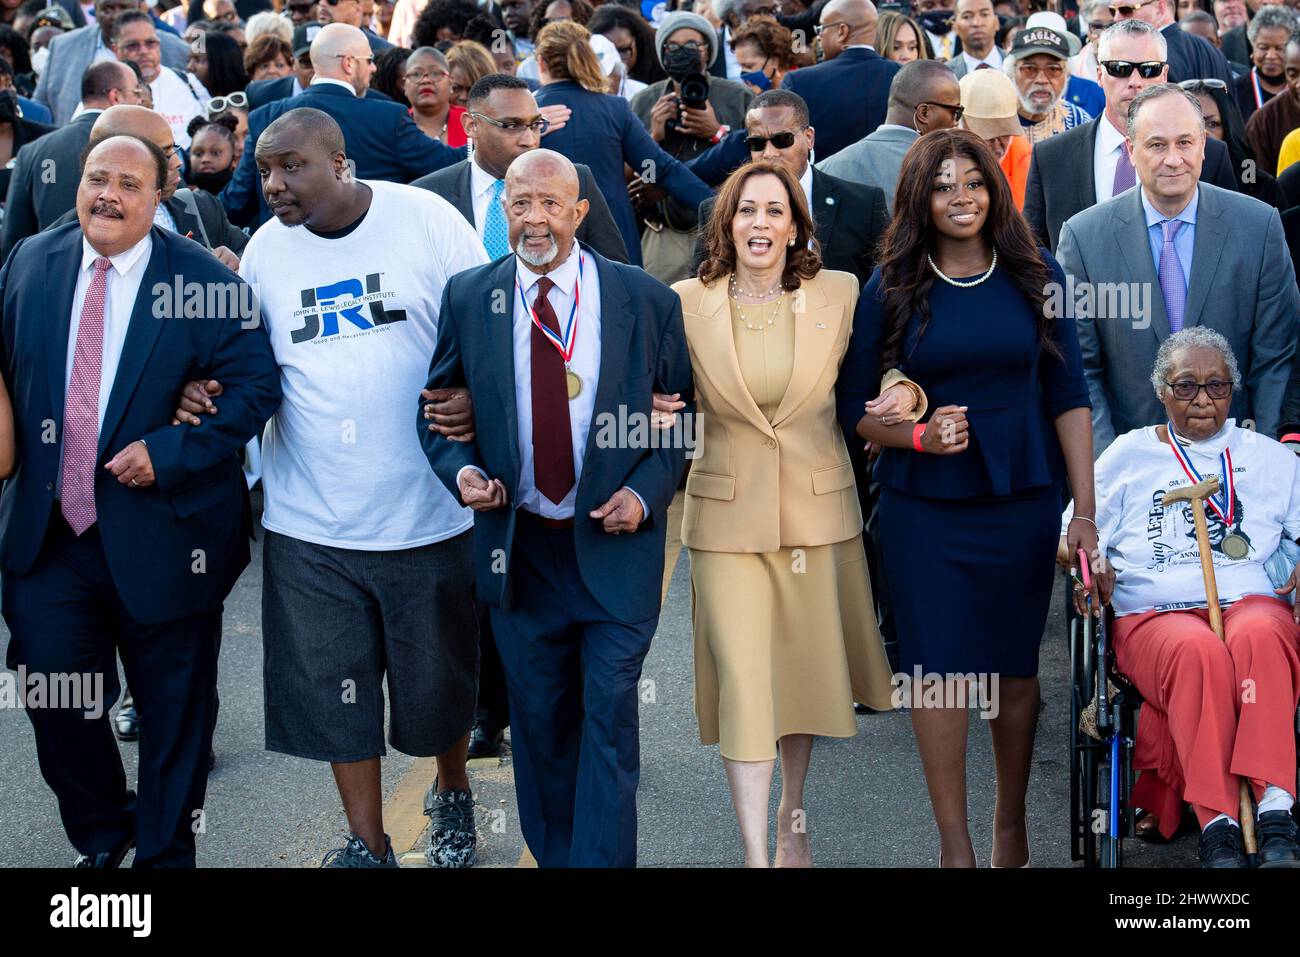 United States Vice President Kamala Harris is accompanied by Martin Luther King, III, John Miles Lewis, Charles Mauldin, Miss ASU Kendra Angion, Annie Pearl Avery and SGOTUS Doug Emhoff as they ceremonially cross the Edmund Pettus Bridge in Selma, AL. to commemorate the 57th anniversary of Bloody Sunday on March 6, 2022. Photo by Andi Rice / Pool via CNP/ABACAPRESS.COM Stock Photo